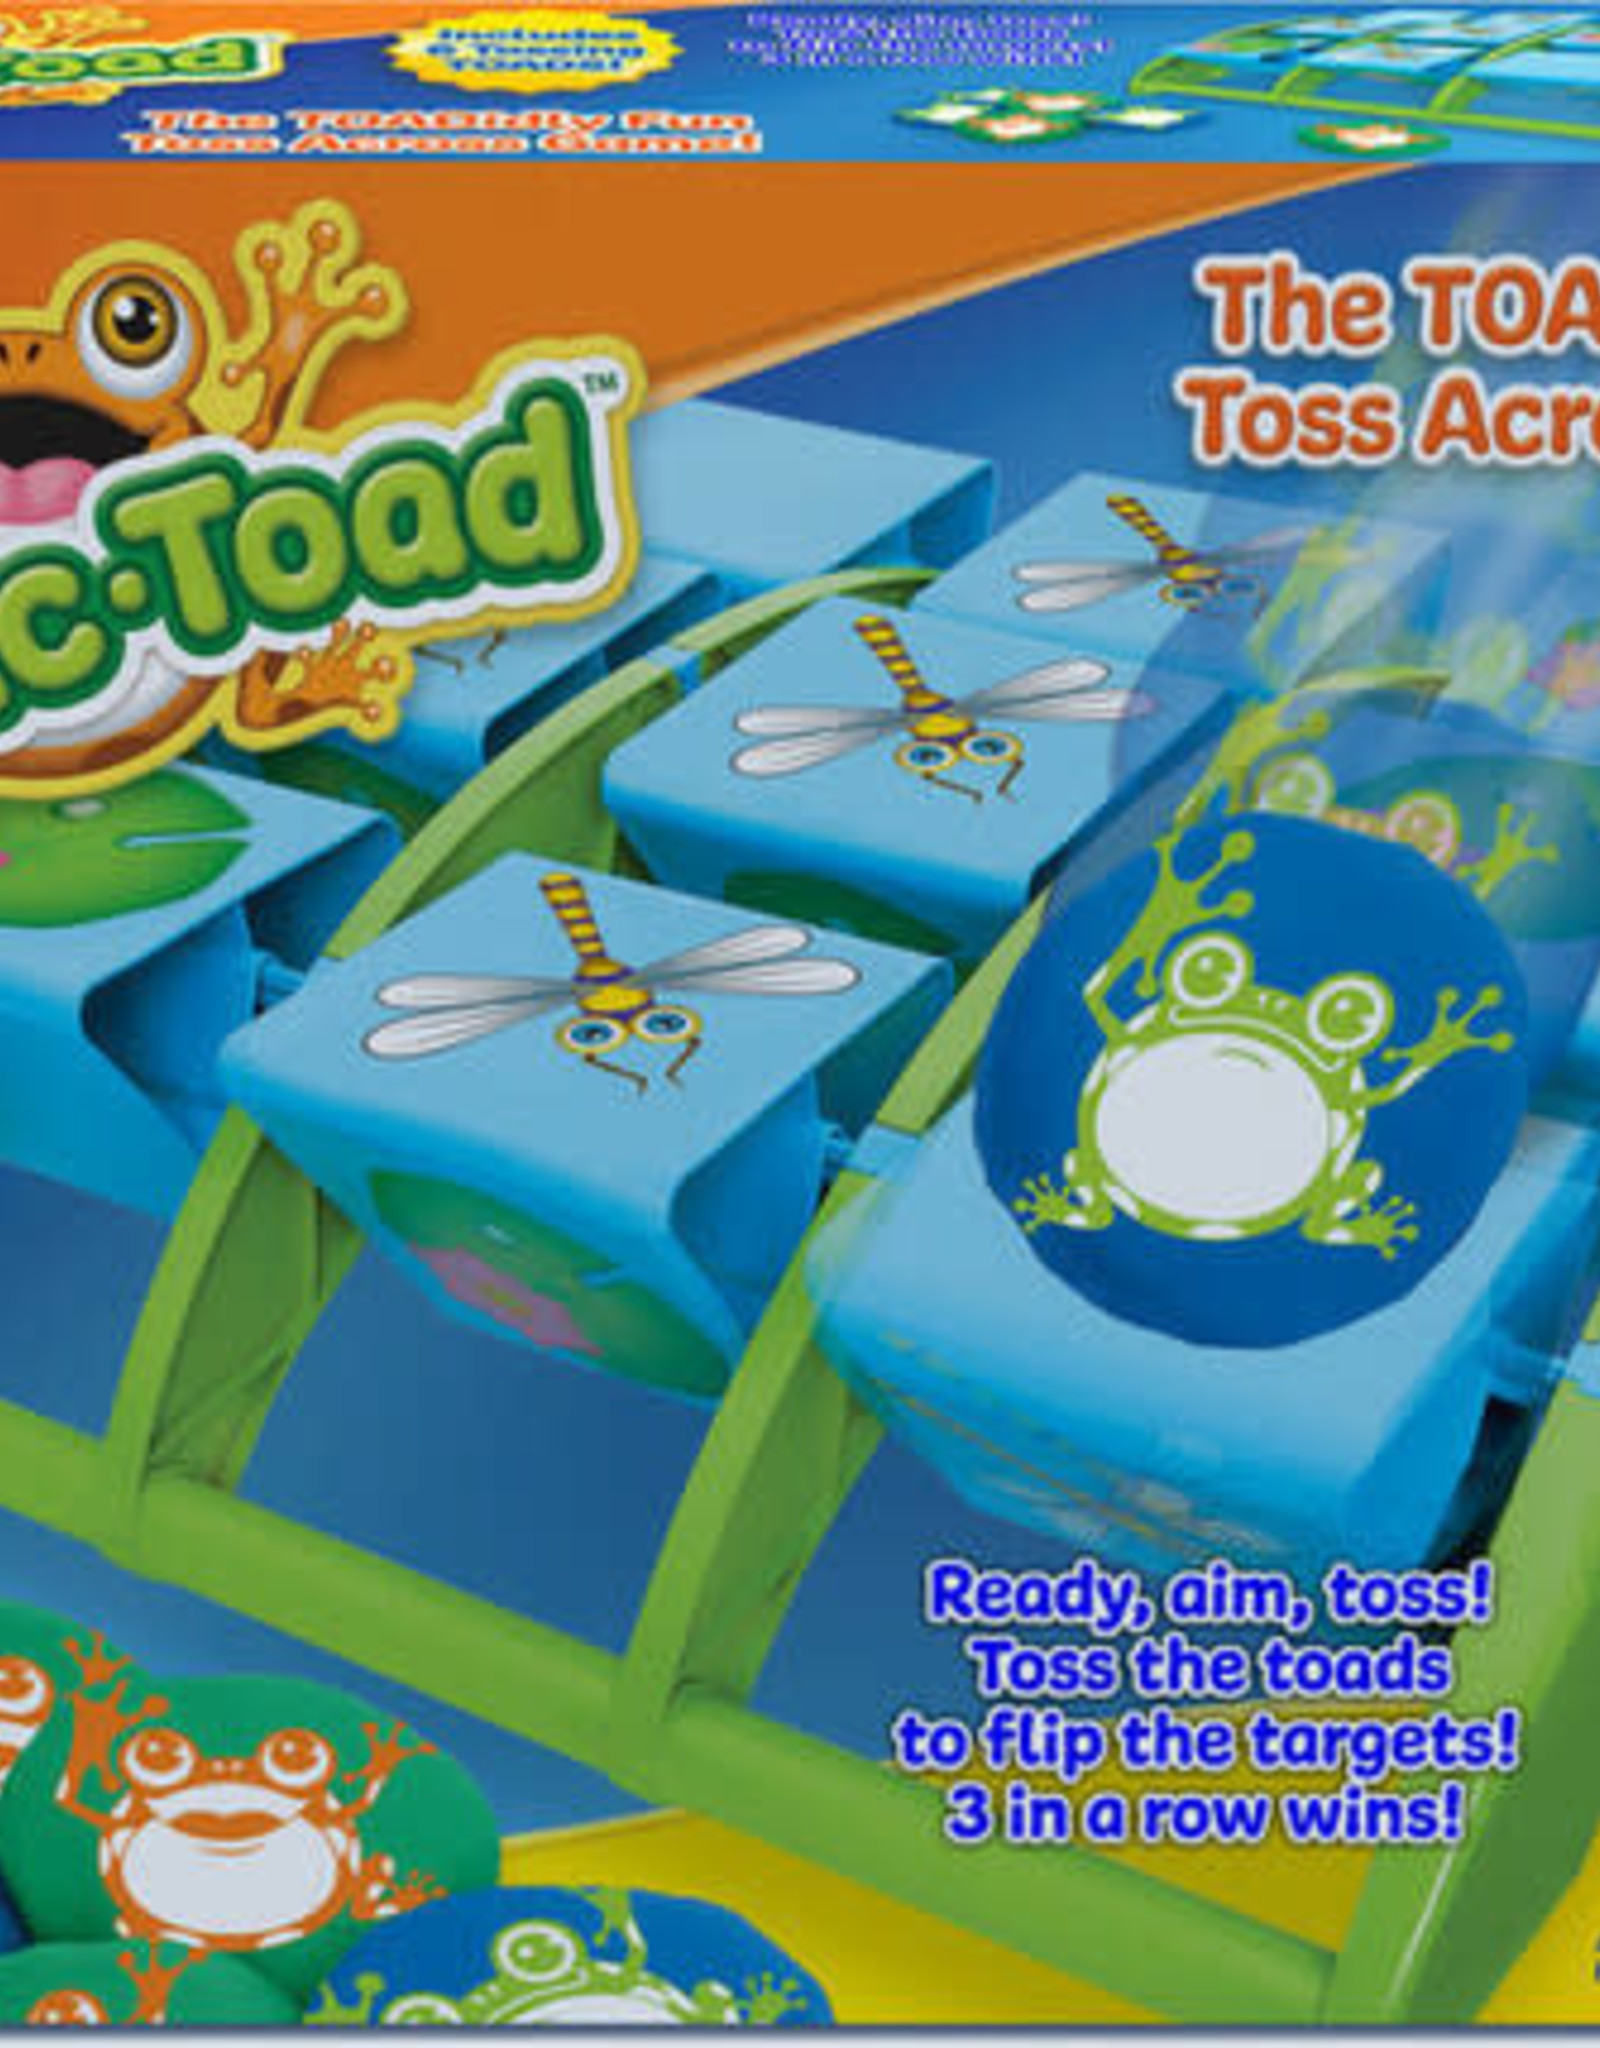 INTERNATIONAL PLAYTHINGS EPOCH TIC TAC TOAD*^**